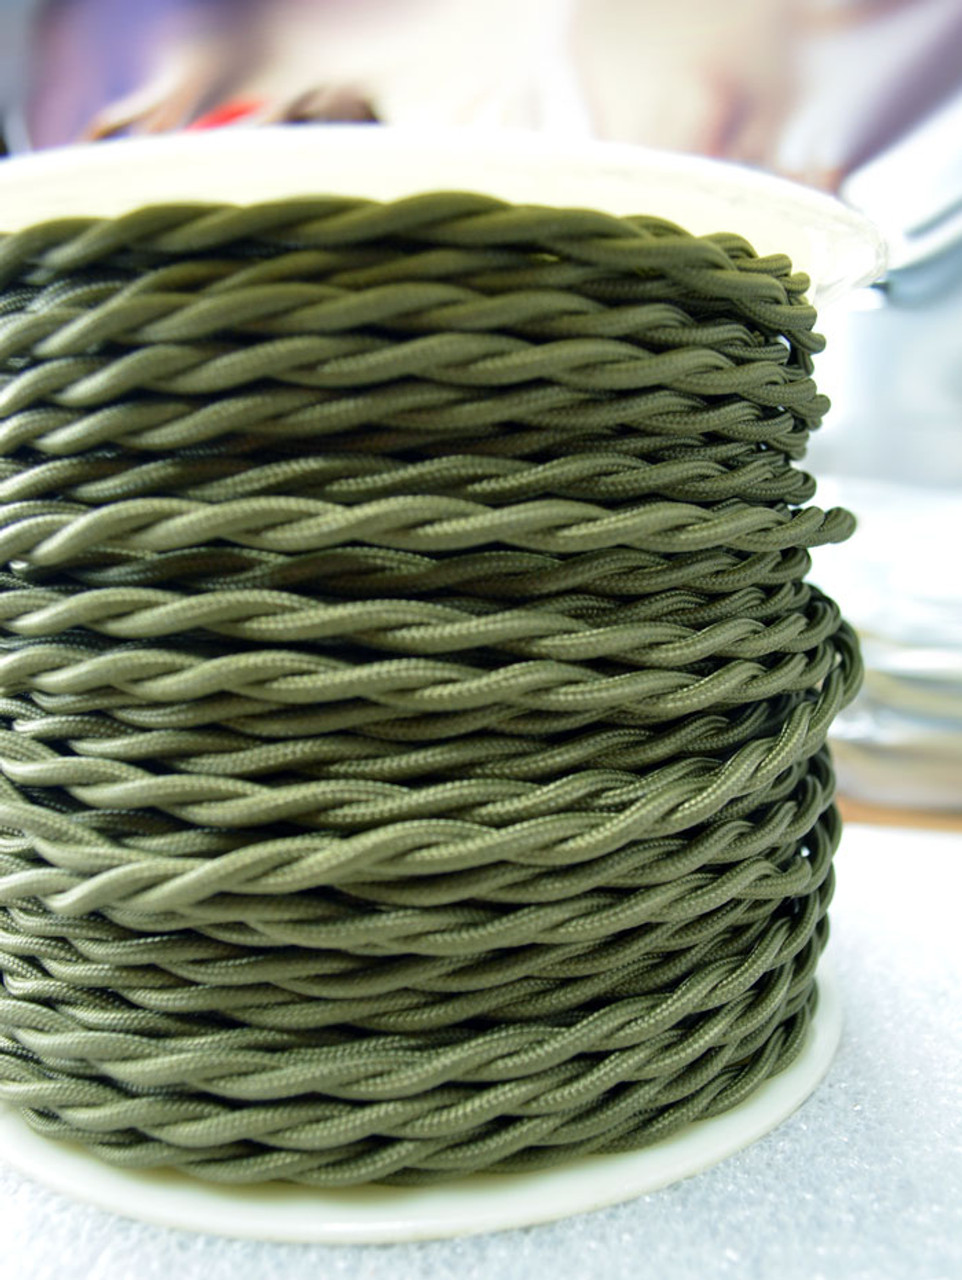 Braided Rayon Fabric Wire Mixed Greens Cloth Covered Electrical Wire 